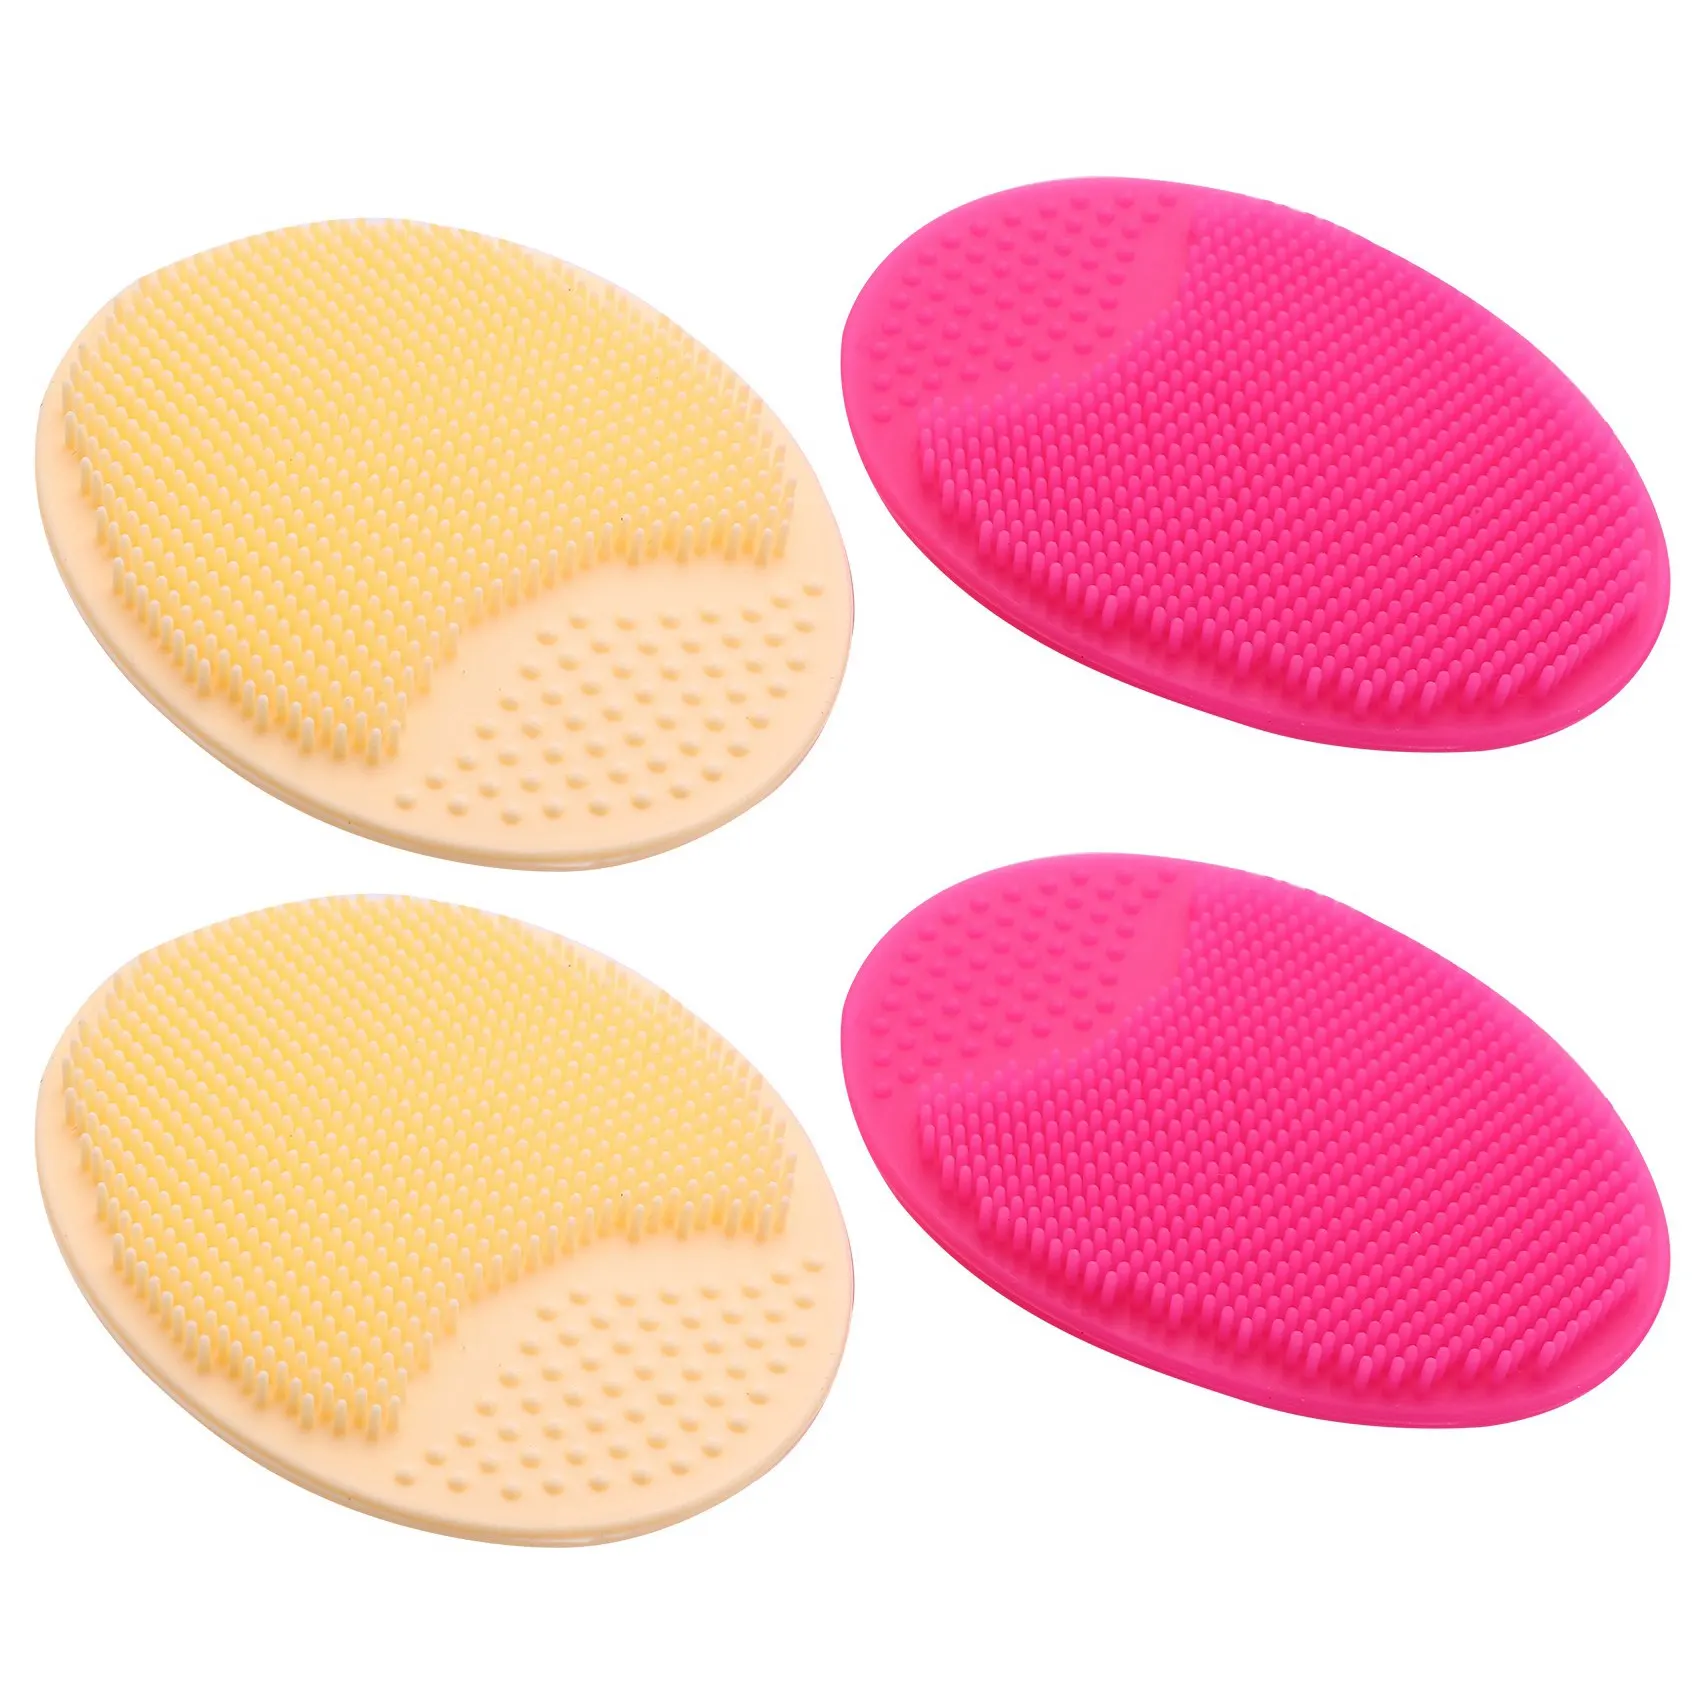 

4Pcs Spa Silicone Beauty Wash Pad Skin Scrub Cleaning Pad Wash Face Facial Exfoliating Brush Cleanser Tool